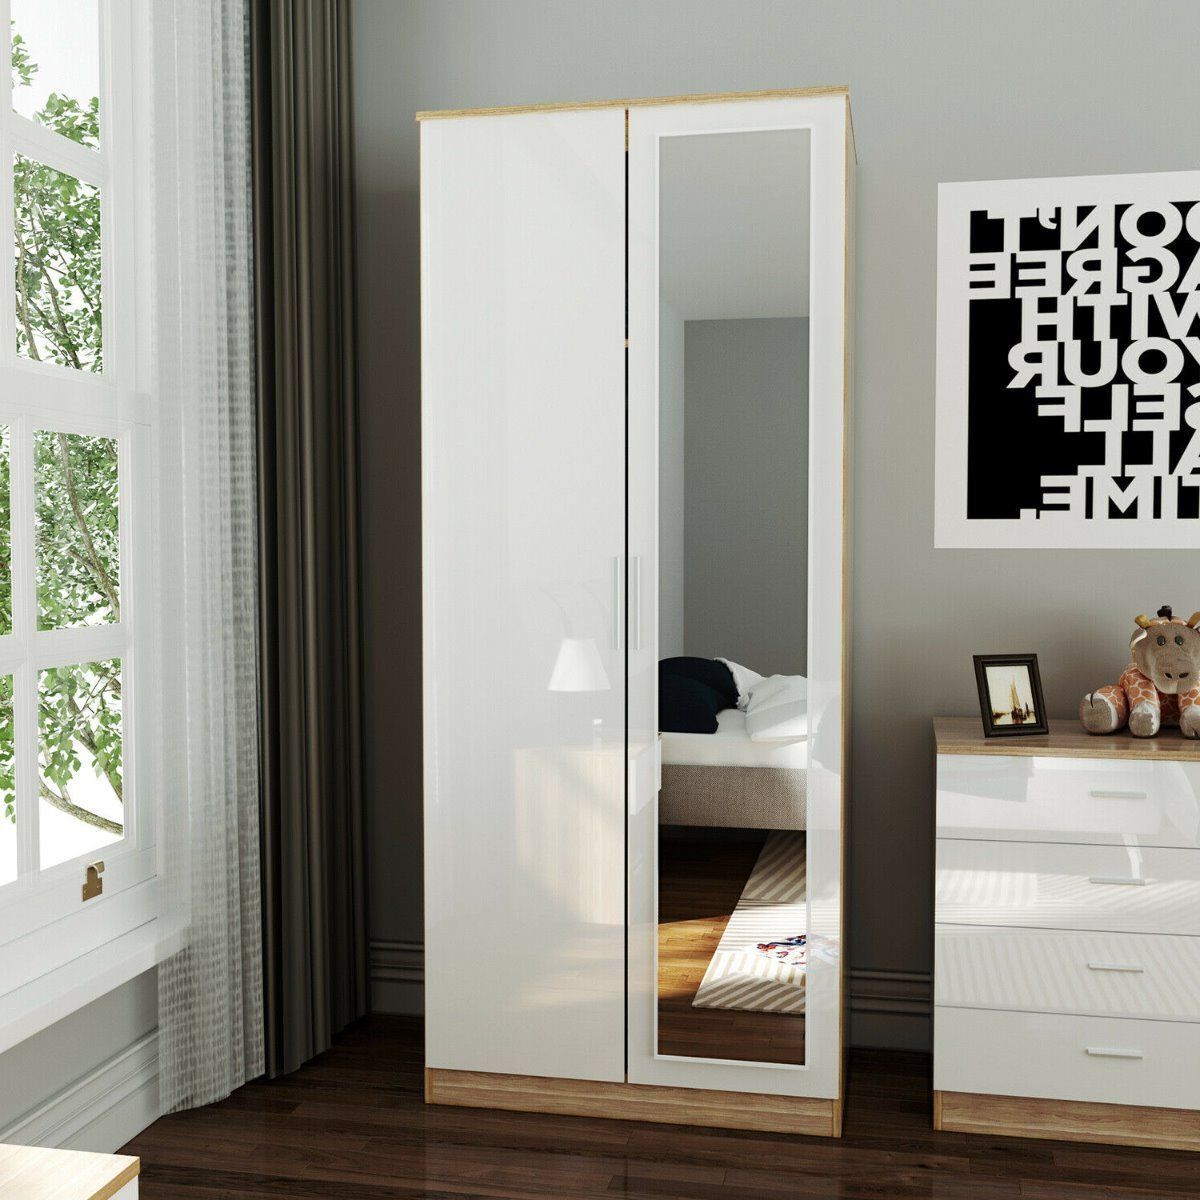 Elegant 2 Door Mirror Wardrobe In White And Oak Finish Soft Close Hinged  Doors Intended For Single White Wardrobes With Drawers (Gallery 12 of 20)